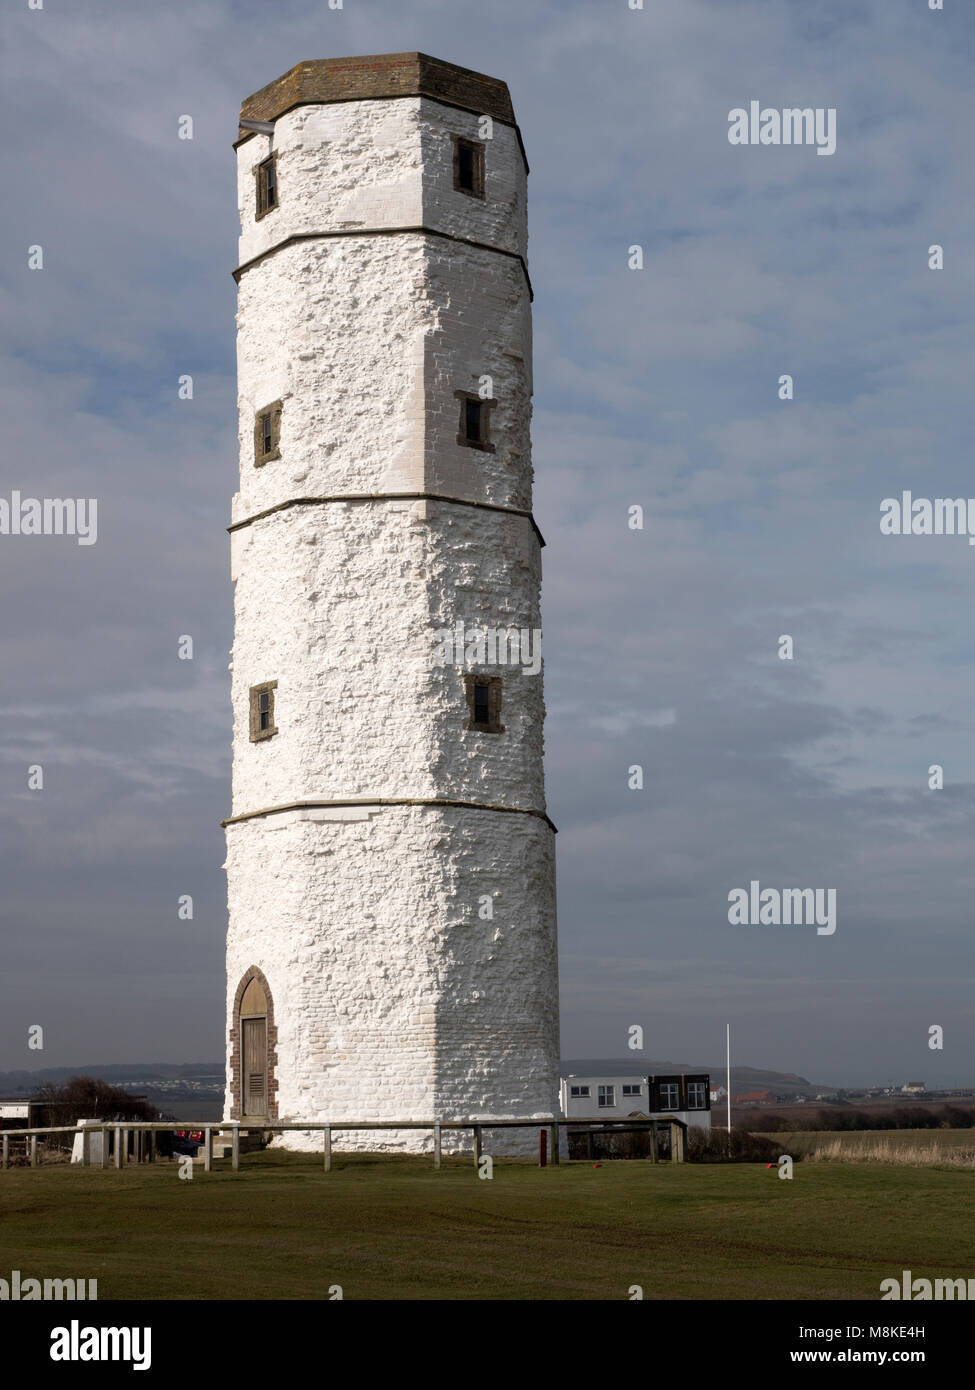 Chalk Tower - former lighthouse and oldest in the UK - at Flamborough Head, Flamborough, East Riding of Yorkshire, Yorkshire,  England, UK. Stock Photo